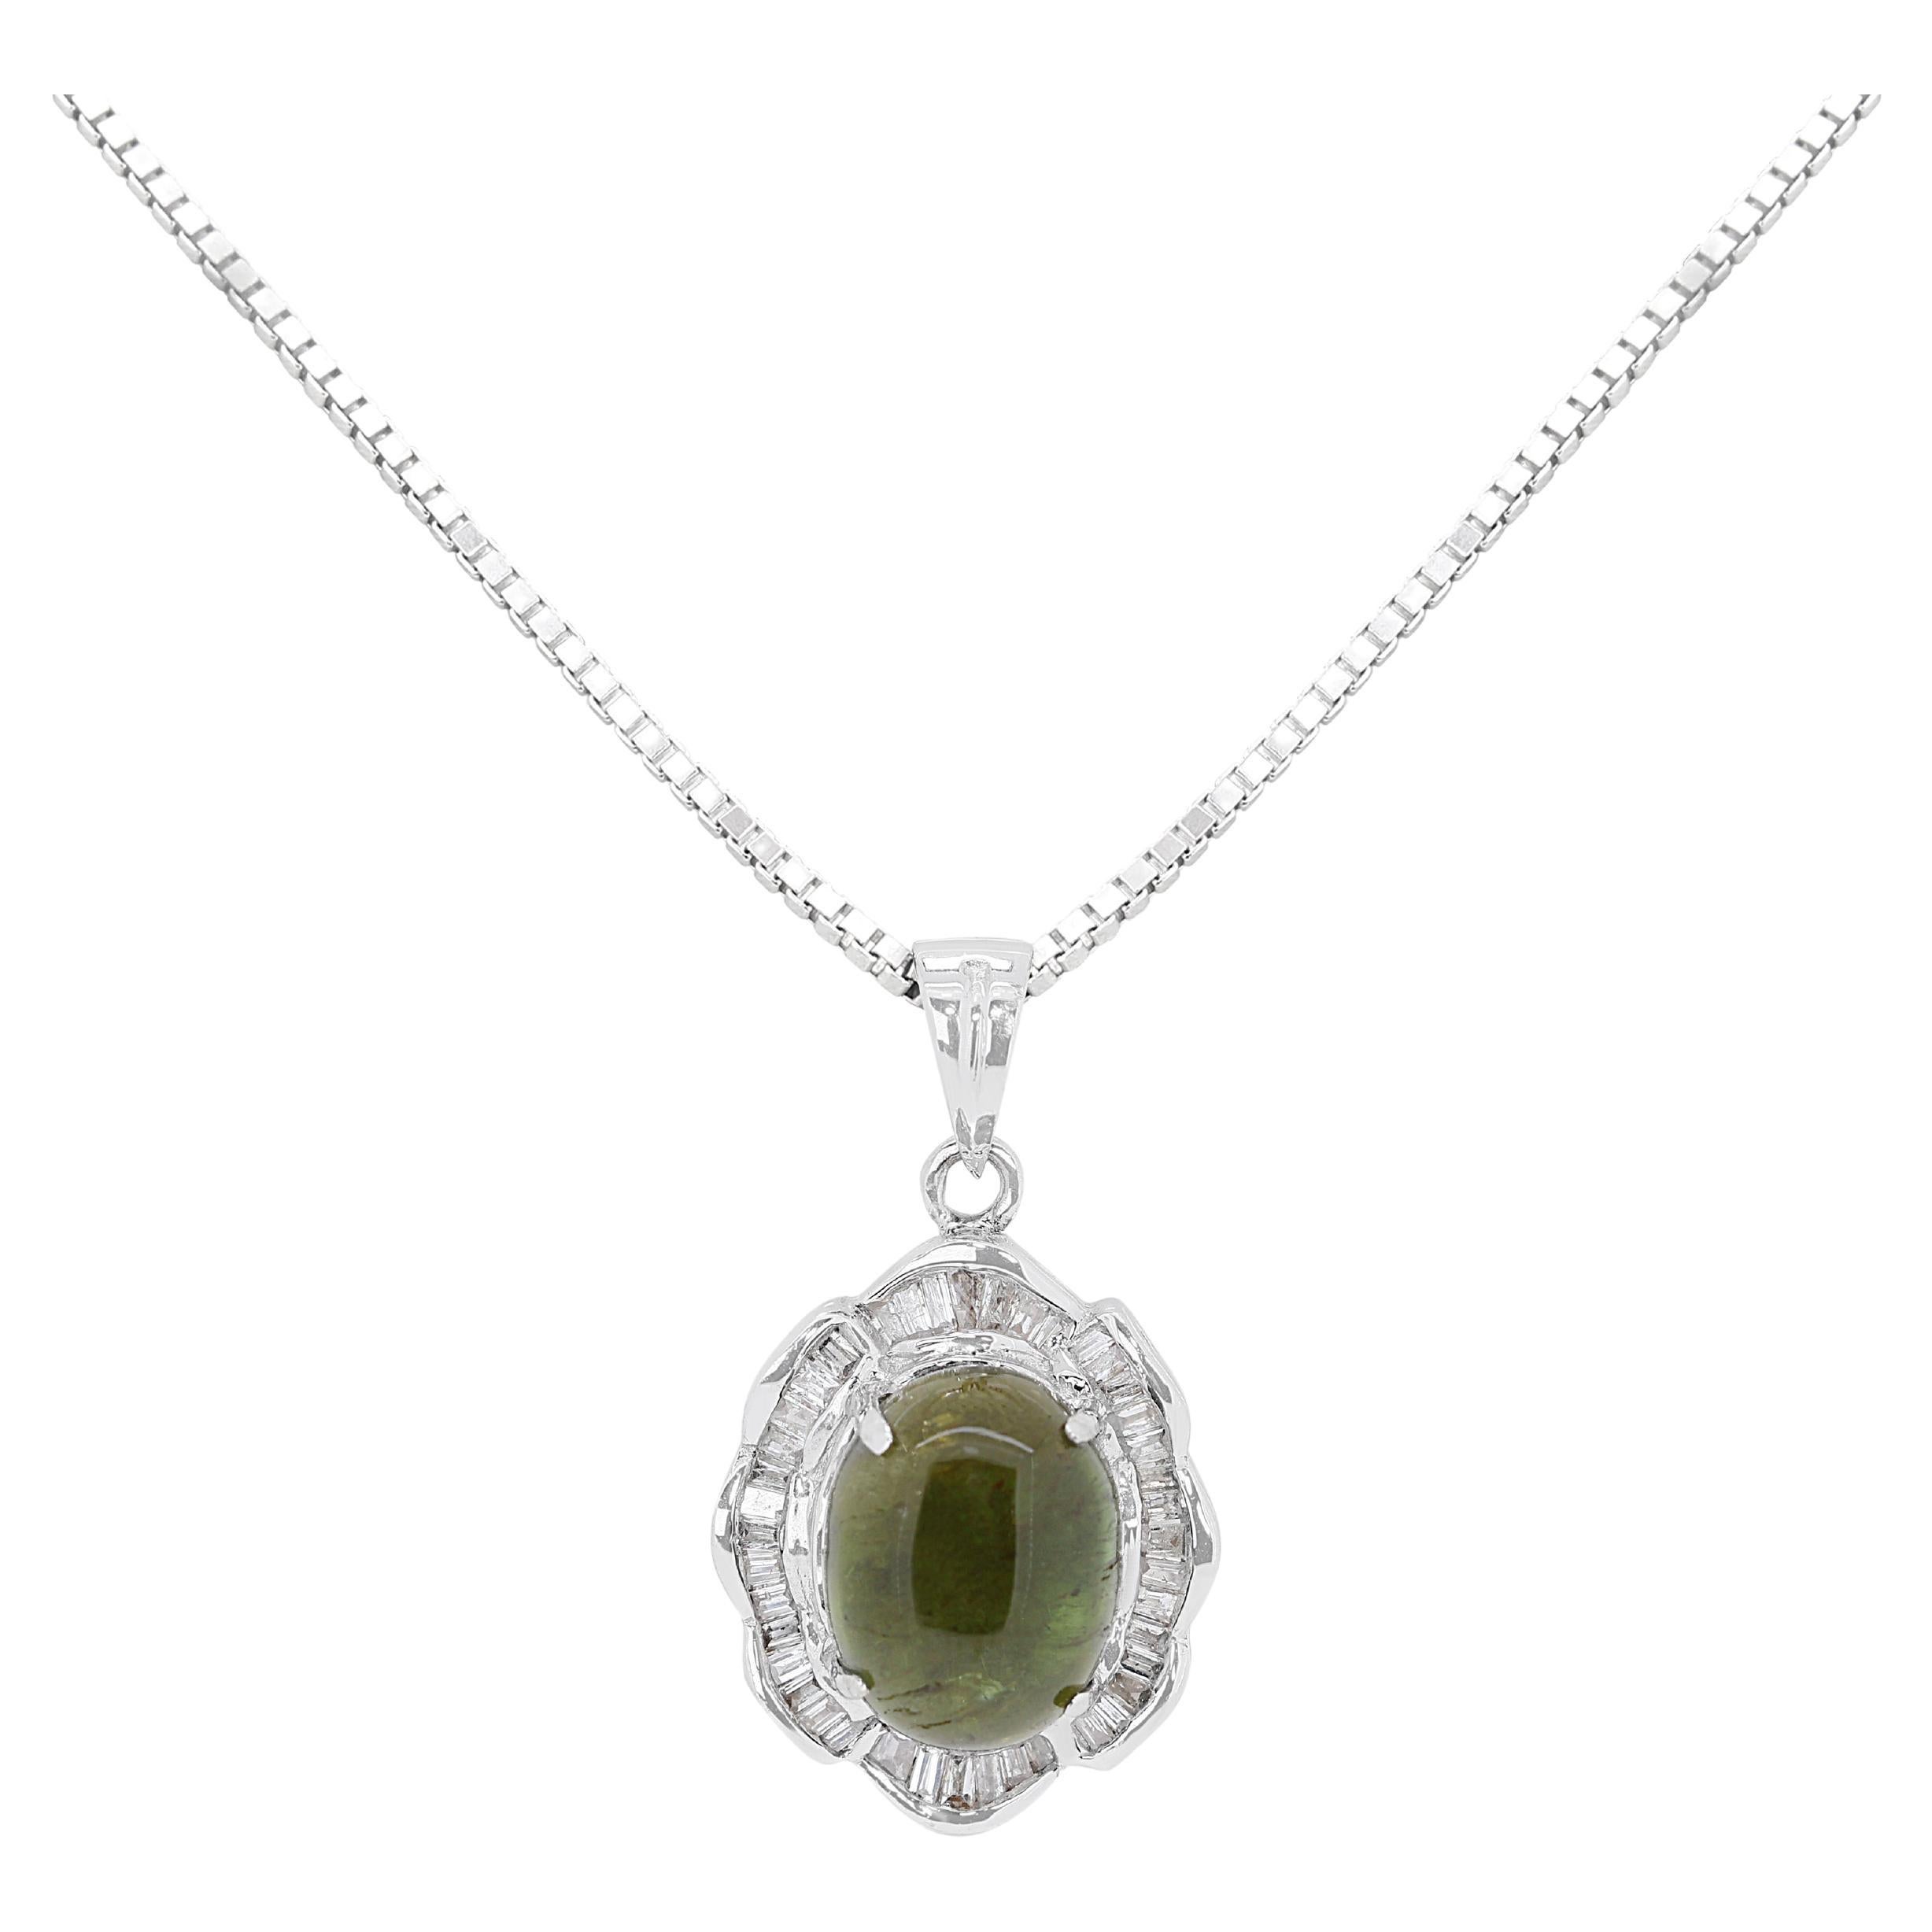 Fascinating 2.83ct Tourmaline Pendant w/ Diamonds - (Chain not Included) For Sale